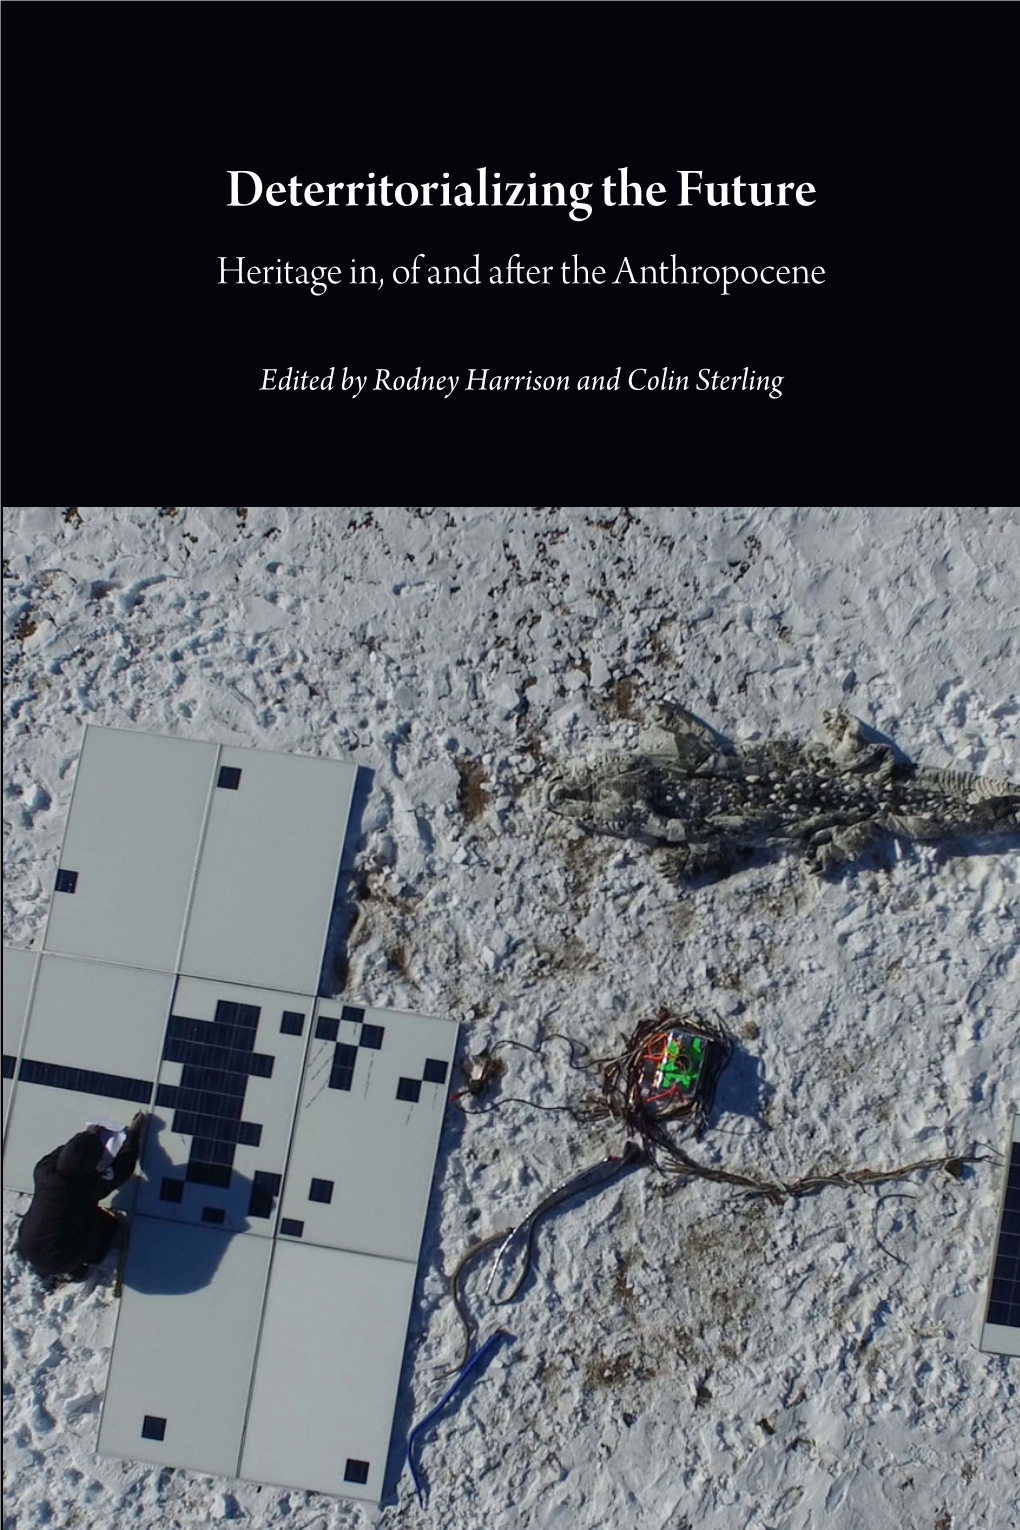 Deterritorializing the Future Heritage In, of and After the Anthropocene